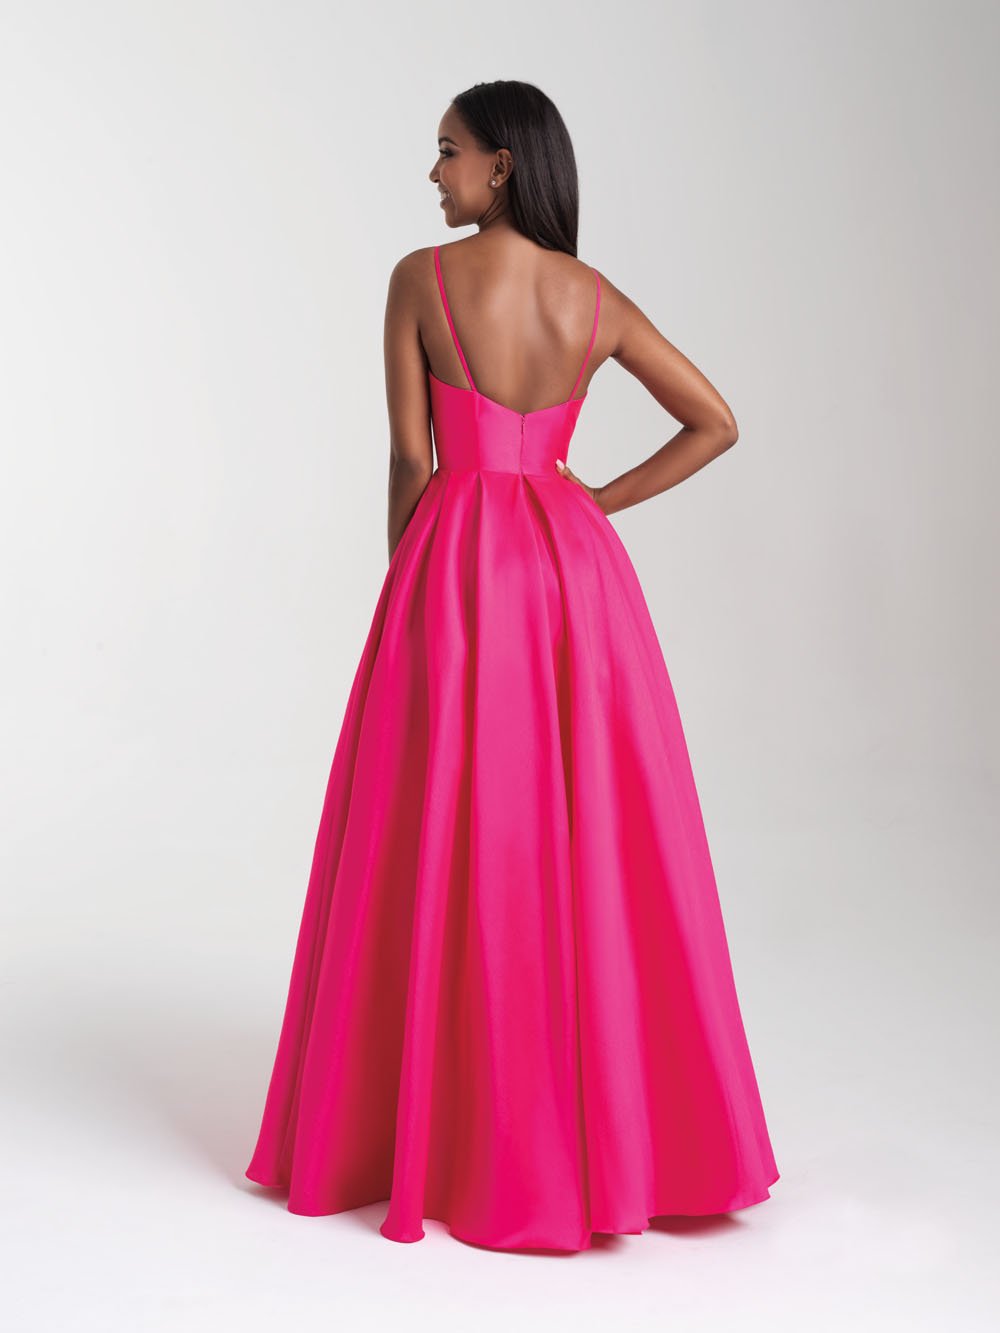 Madison James 20-361 dress images in these colors: Pink, Yellow, Royal, Coral, Diamond White.